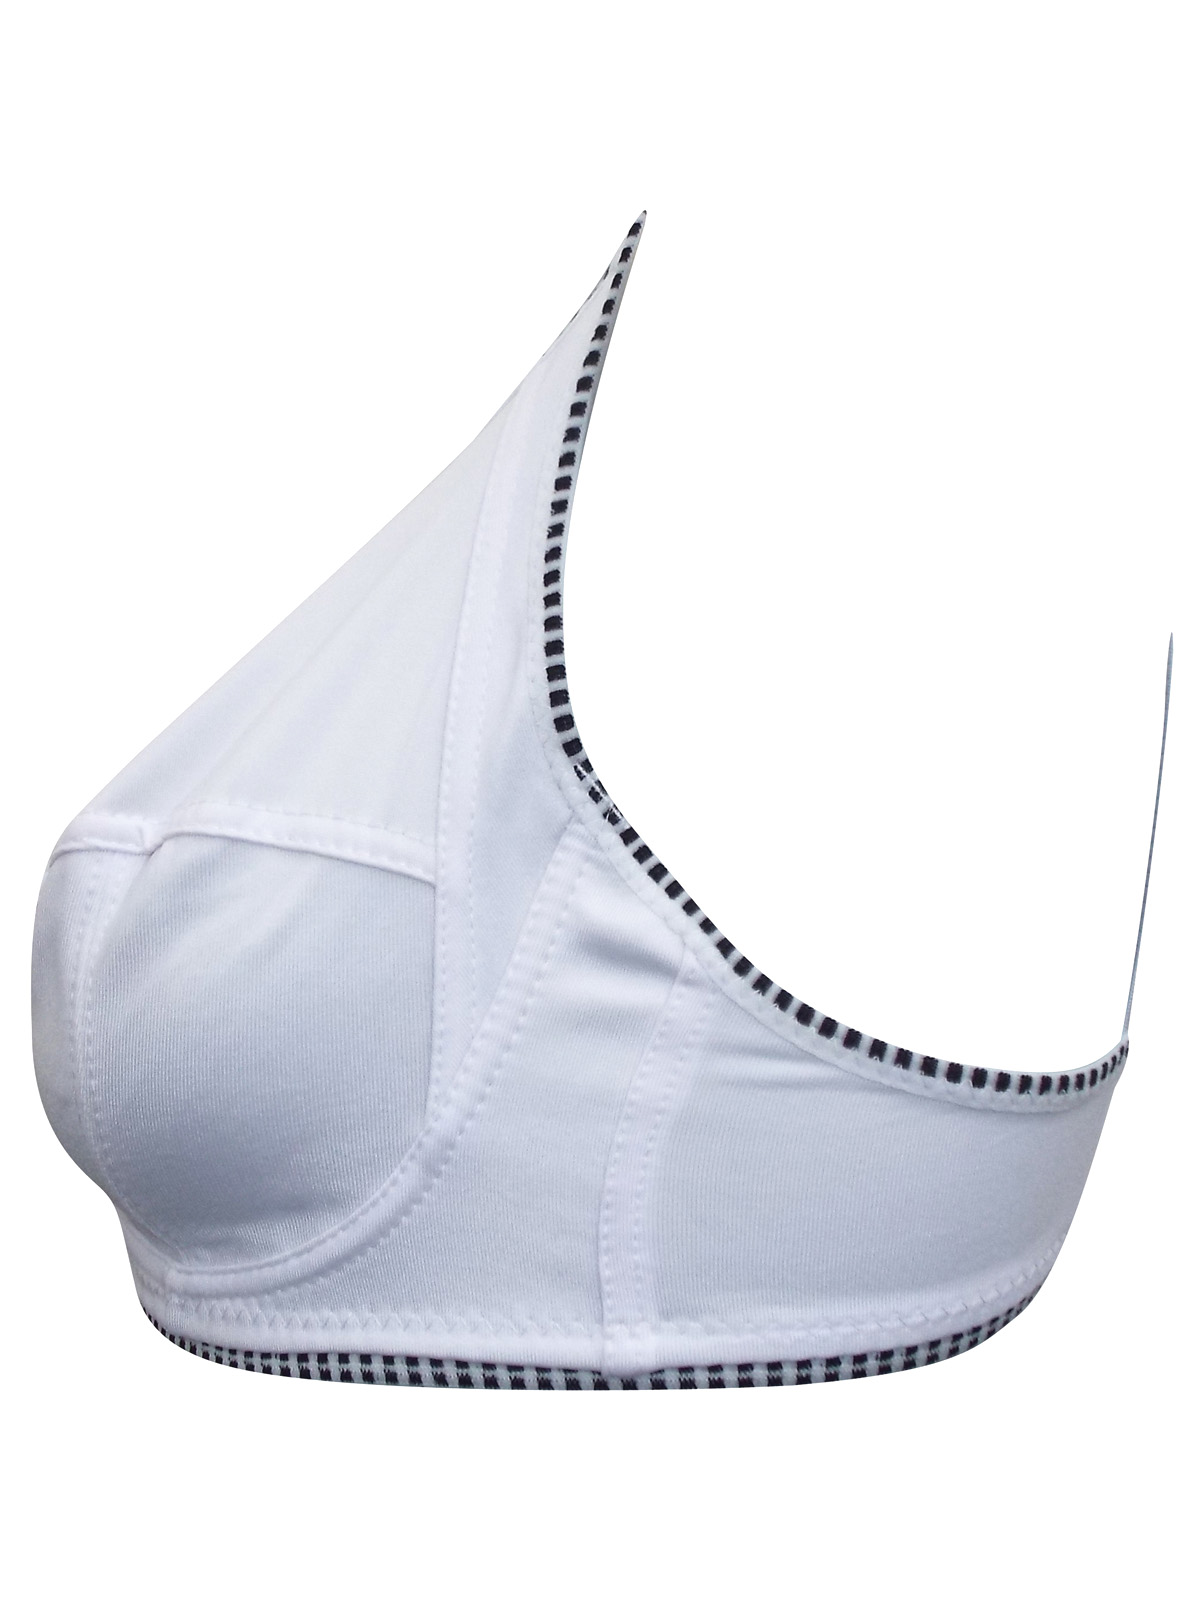 Hana - - Hana WHITE Contrast Trim Underwired Full Cup Bra - Size 42 to 52 (D  cup)